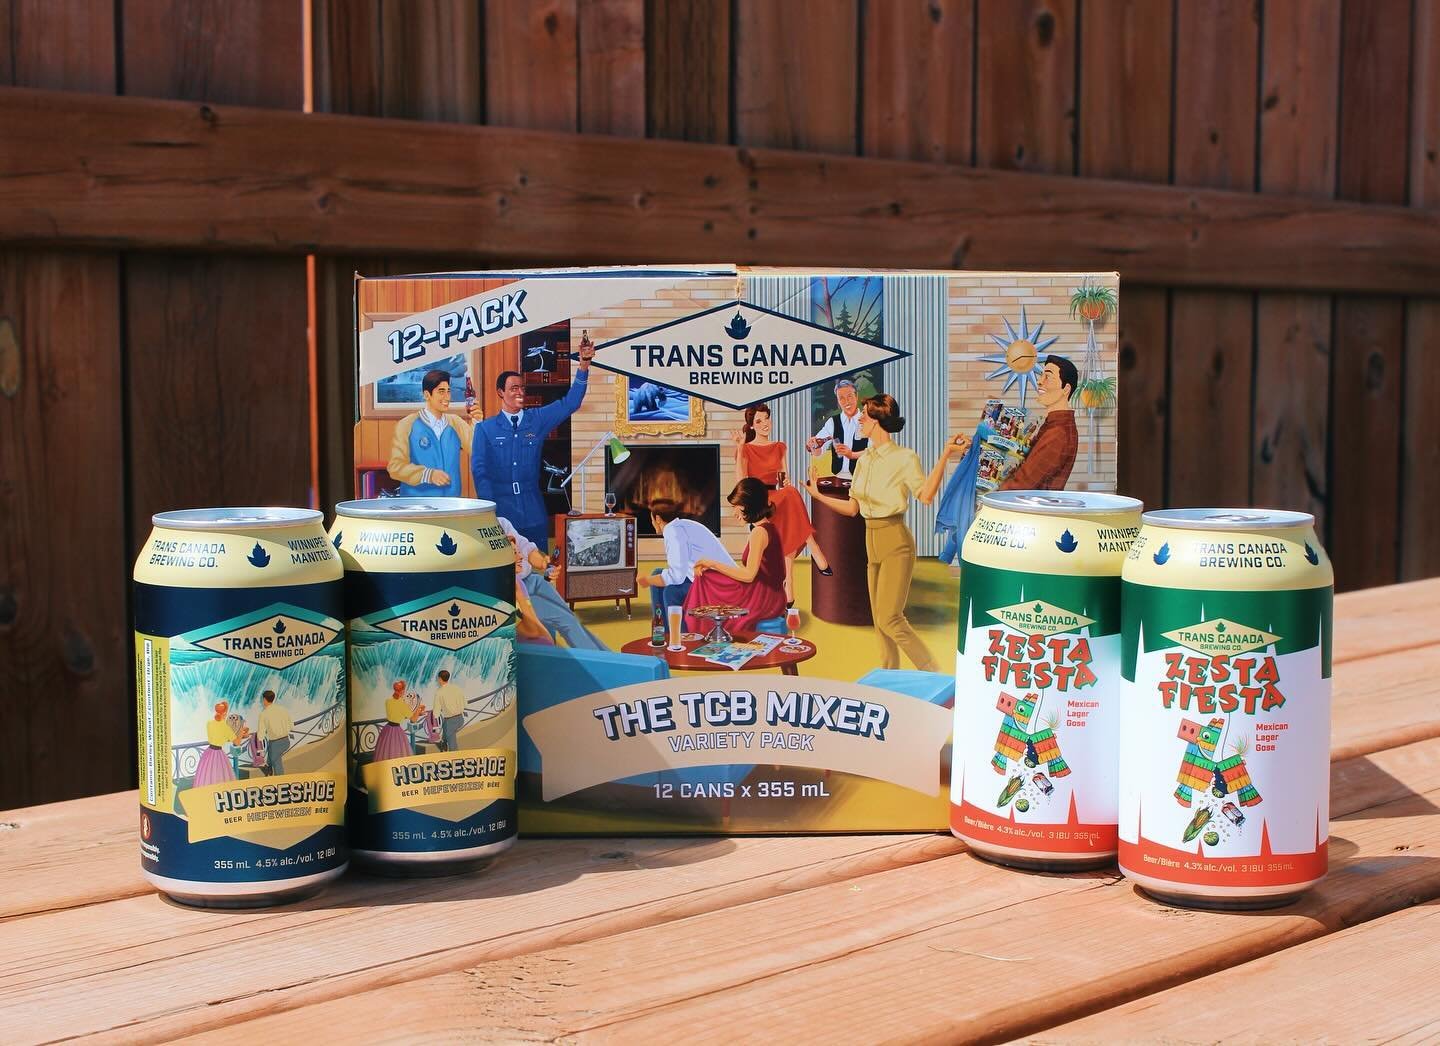 TCB Mixer Variety Pack Vol.13!

This mix features Avenger American Pale Ale along with two exclusive brews.

What&rsquo;s inside?

Mixer Exclusives:
2x 355 ml. Horseshoe Hefeweizen 🌊🍌
A traditional wheat beer as hazy as the mist from the magnificen